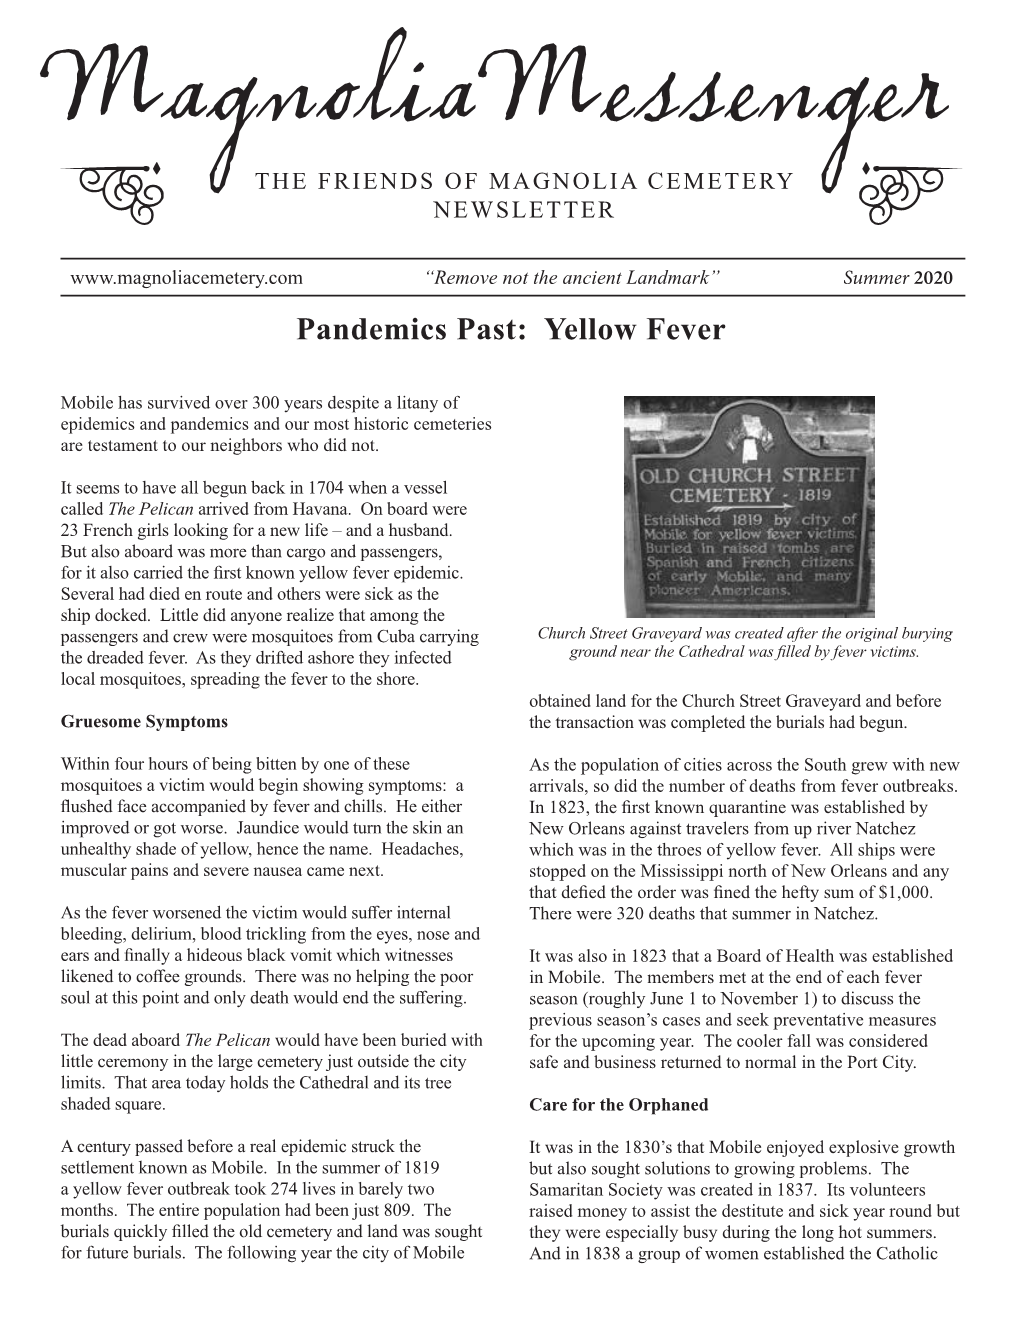 MAGNOLIA CEMETERY NEWSLETTER Page 3